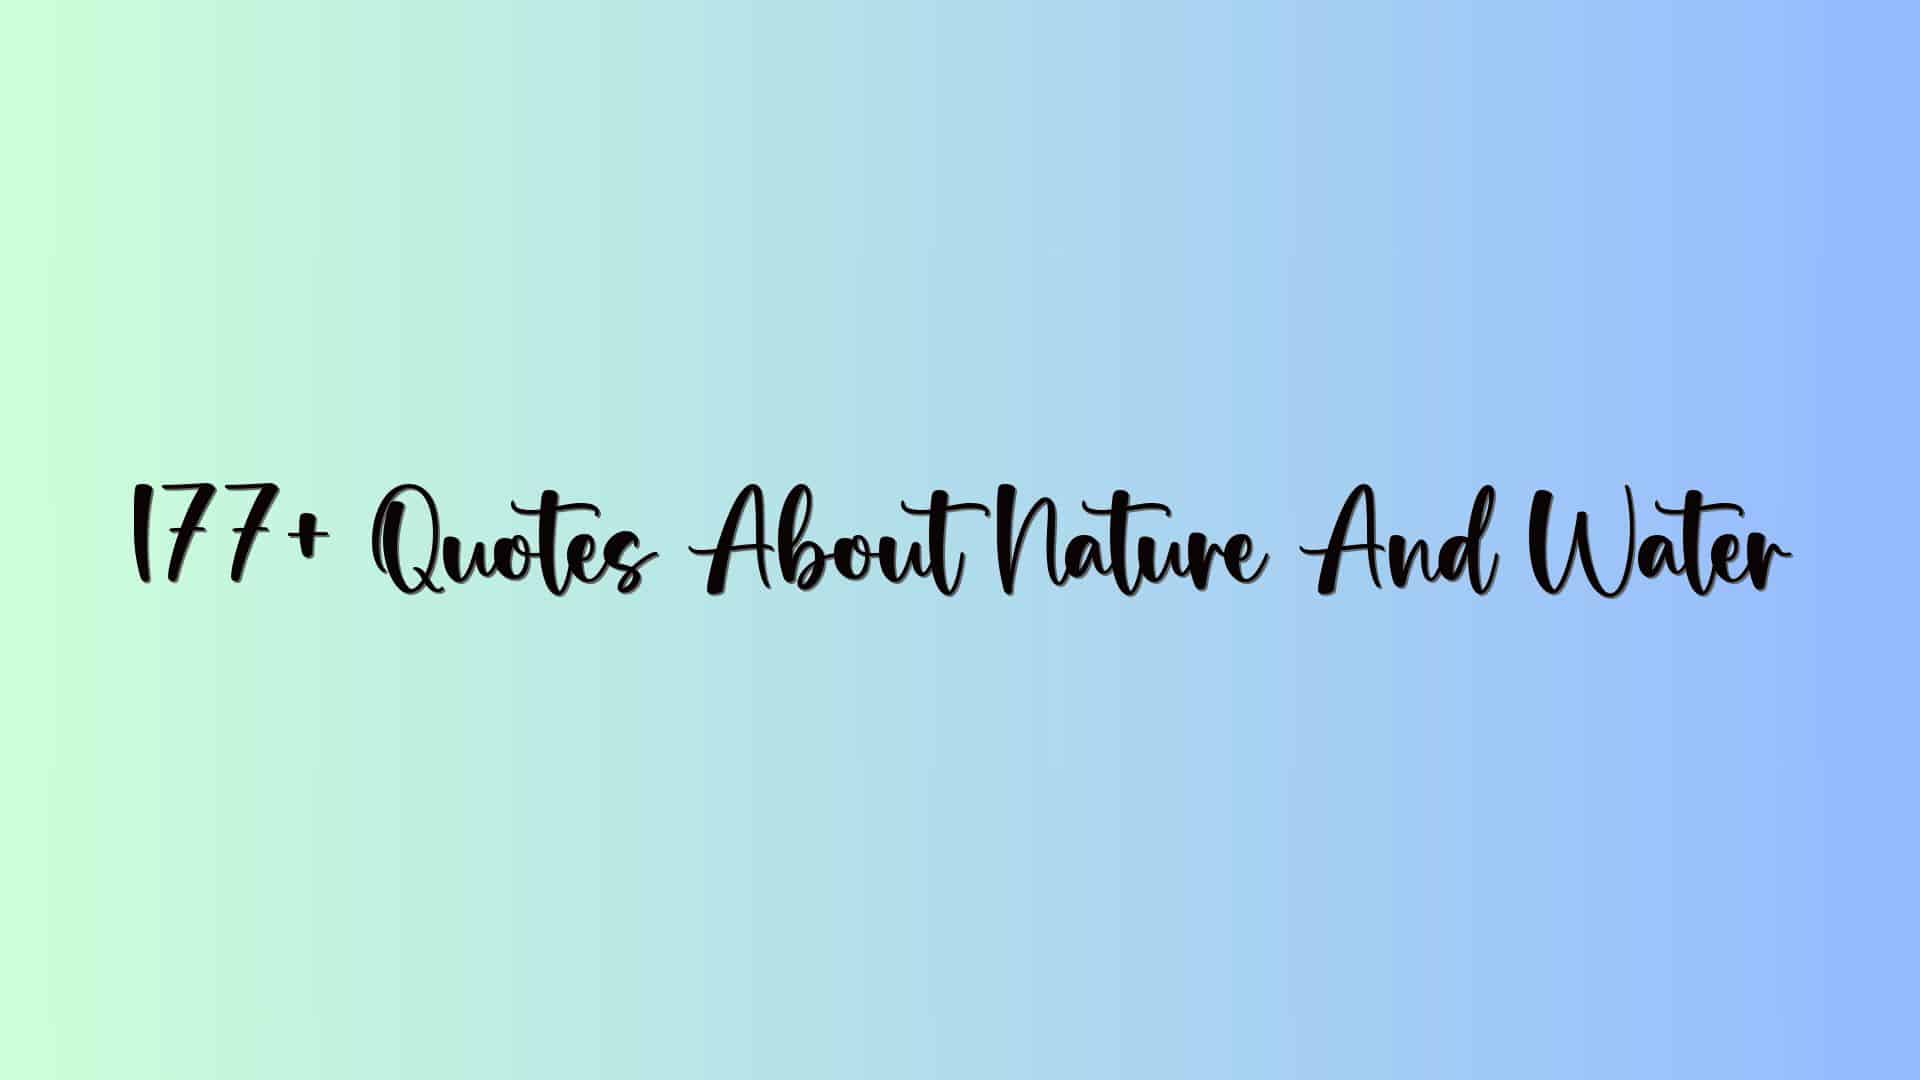 177+ Quotes About Nature And Water